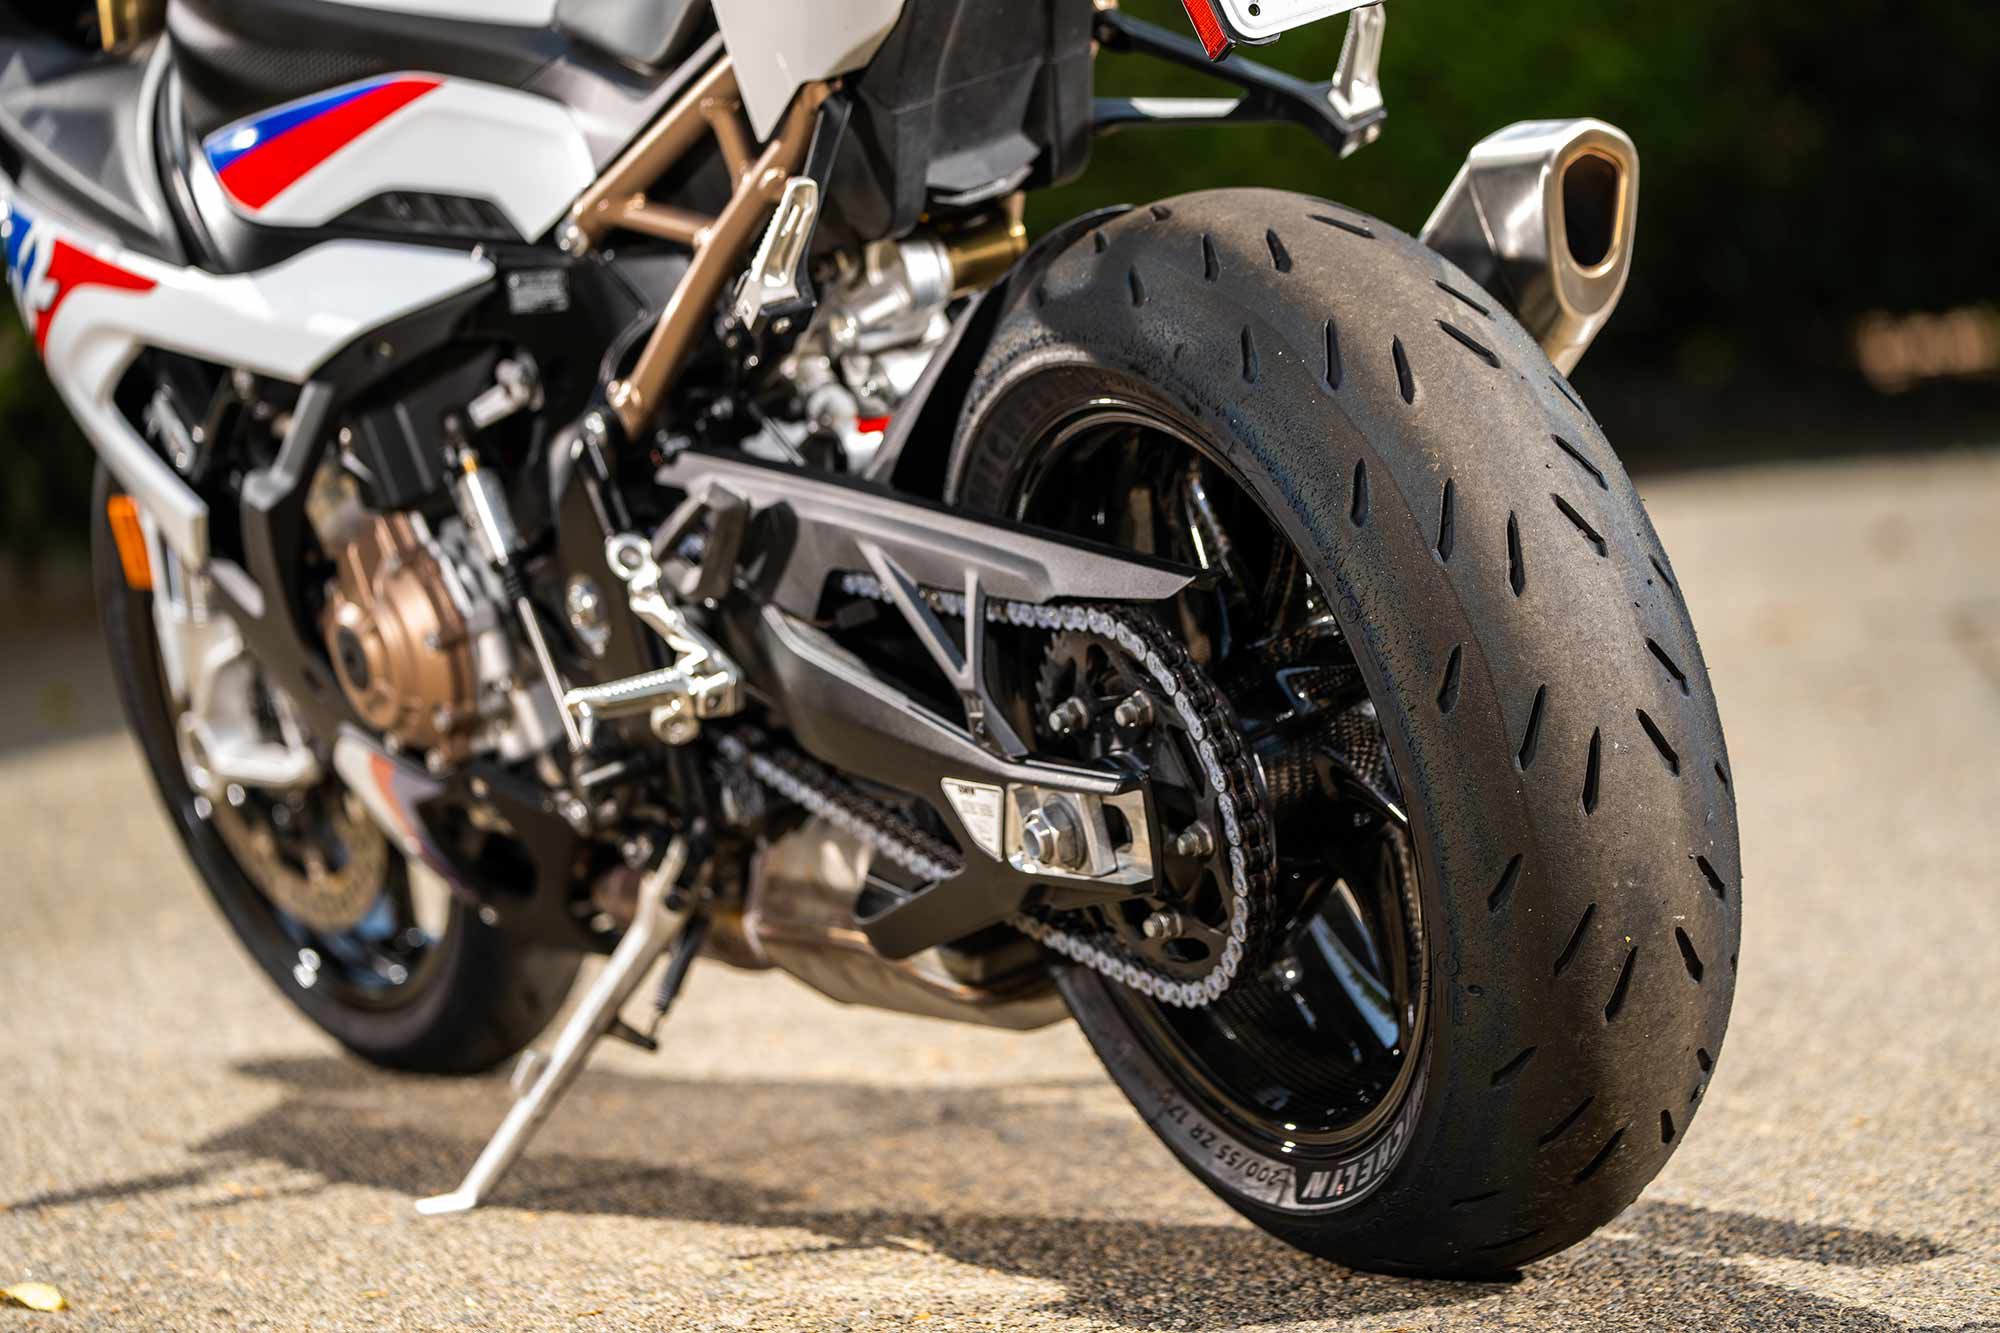 BMW’s superbike rolls on Michelin Power RS tires. The tires aren’t our favorite, but we do like the neatly integrated tire pressure monitoring system as part of the $1,450 Select package.